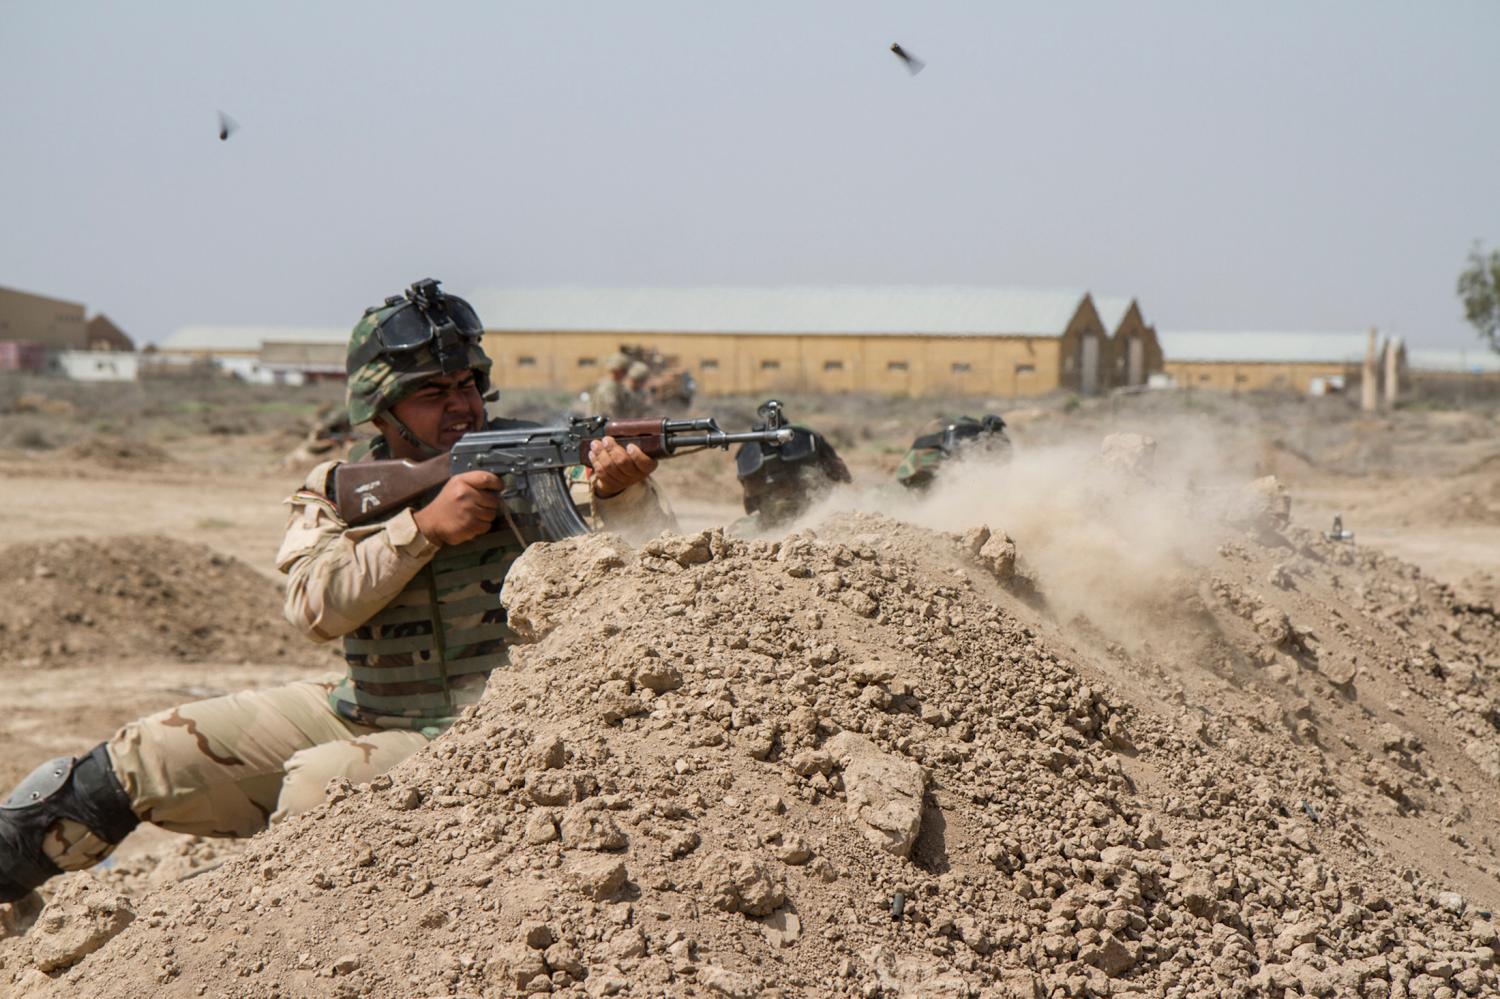 Iraqi soldiers train with members of the U.S. Army 3rd Brigade Combat Team, 82nd Airborne Division, at Camp Taji, Iraq, in this U.S. Army photo released June 2, 2015. The United States is expected to announce on Wednesday plans for a new military base in Iraq's Anbar province and the deployment of around 400 additional U.S. trainers to help Iraqi forces in the fight against Islamic State, a U.S. official said.